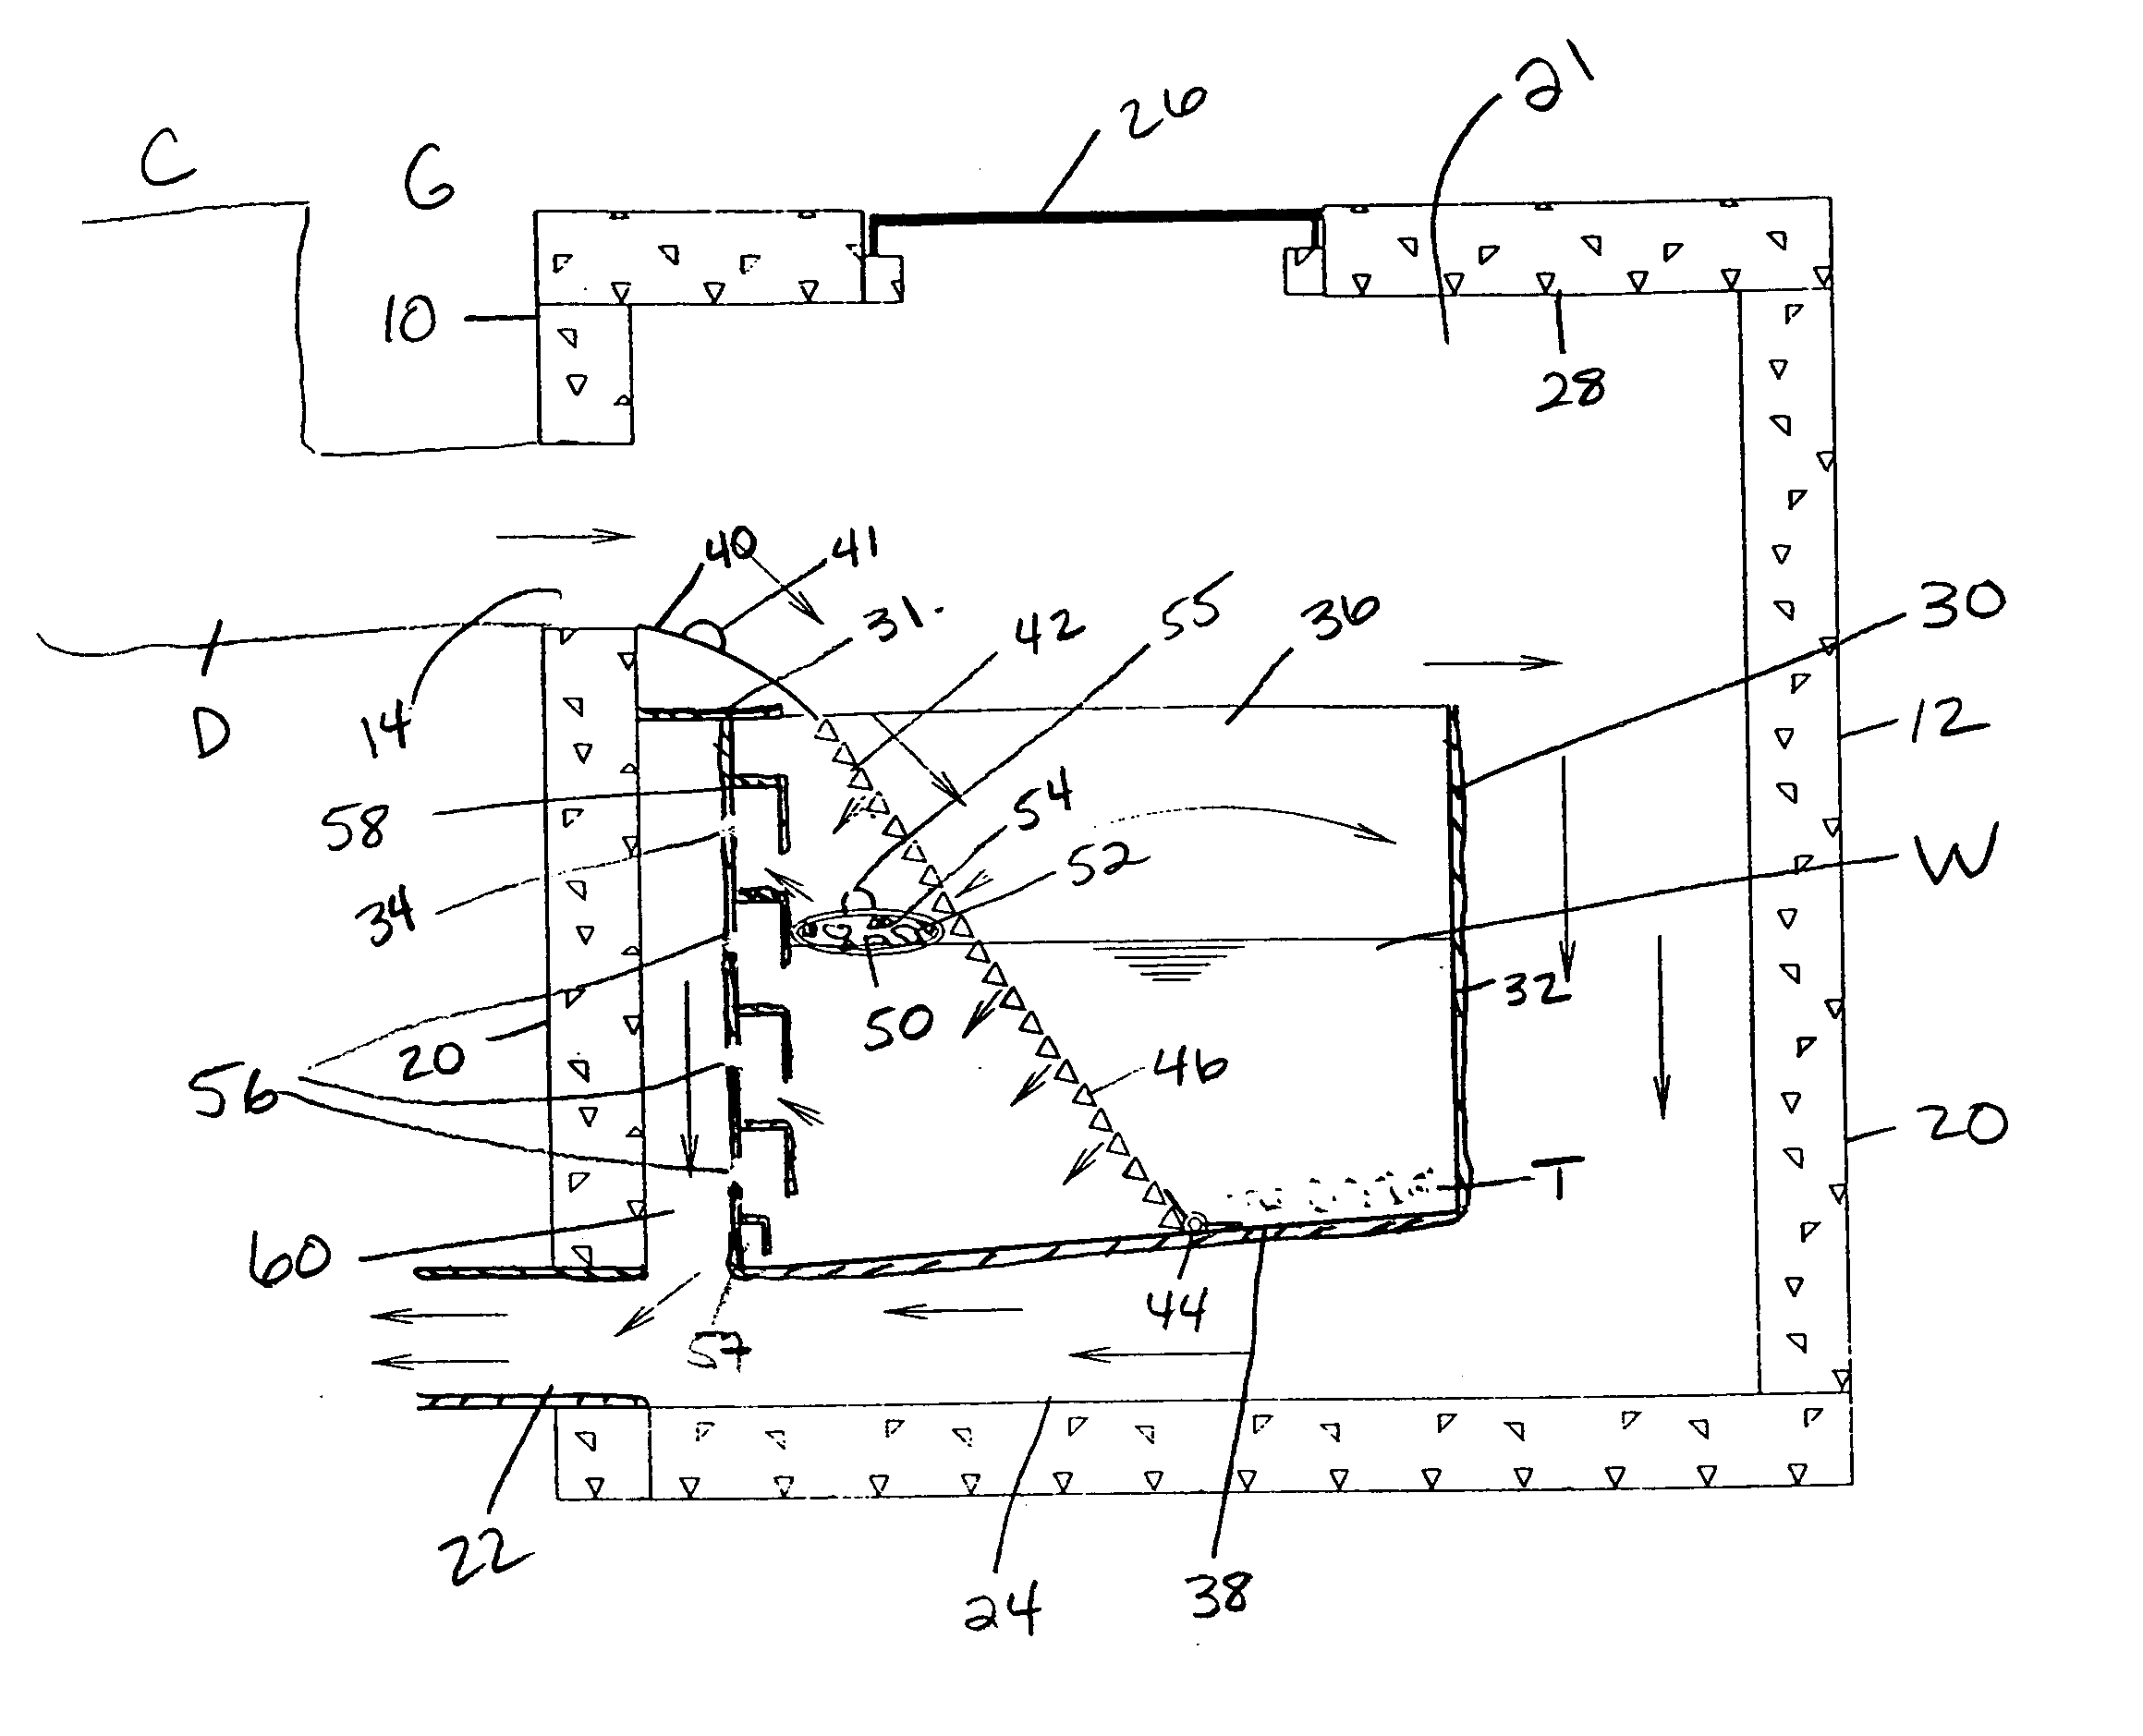 Method and apparatus for separating oil and debris from water run-off